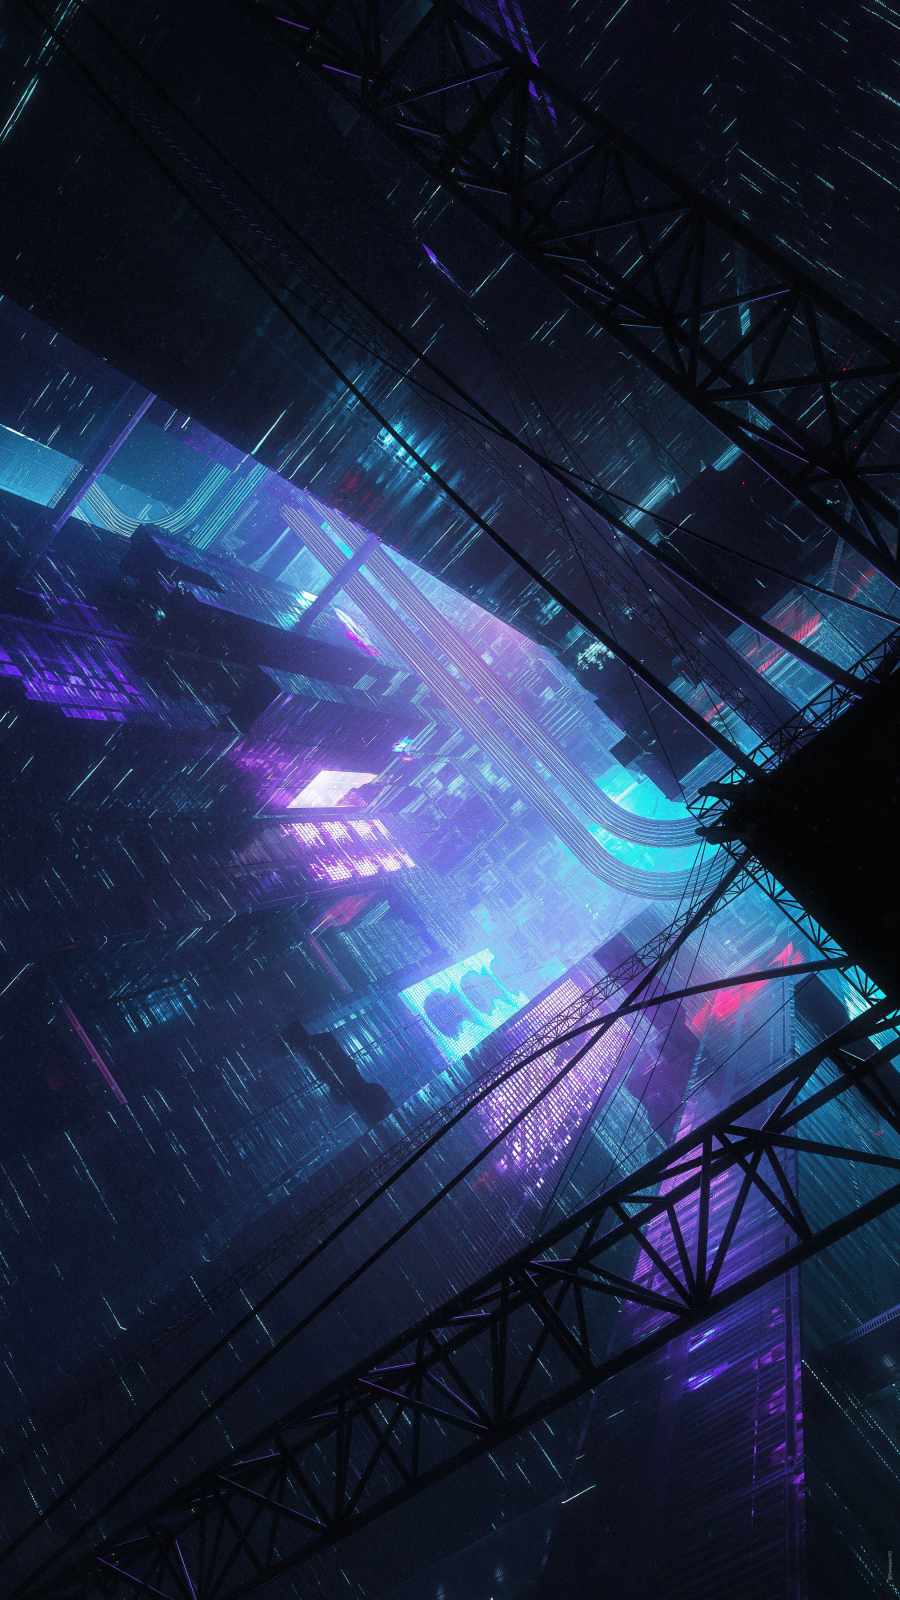 A Cyberpunk wallpaper I made a while ago. Let me know if you'd like me to make more - City